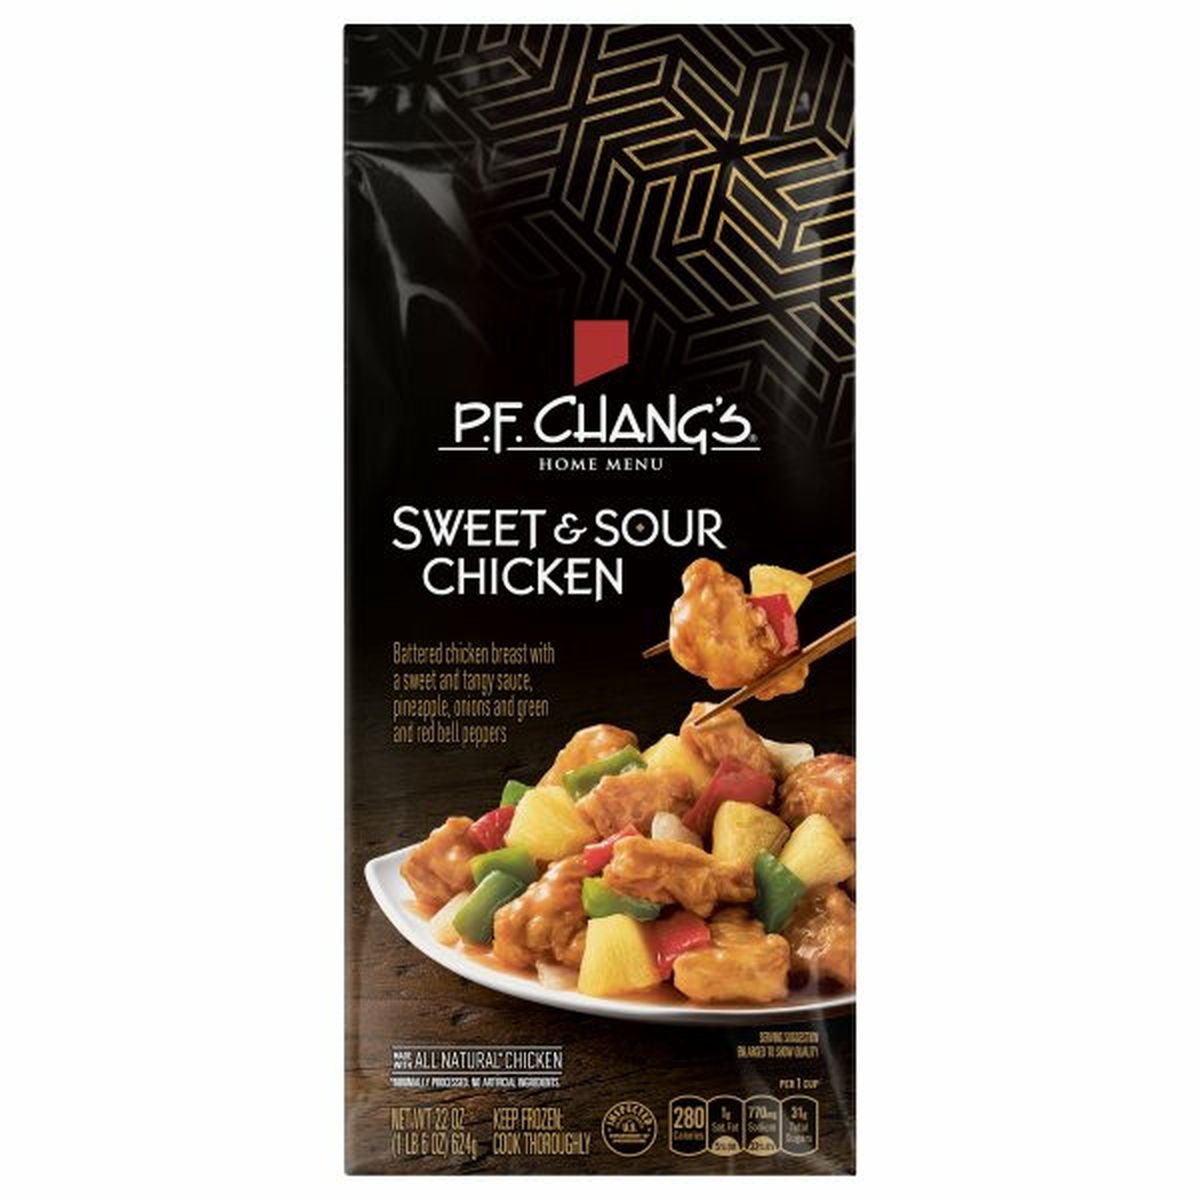 Calories in P.F. Chang's Home Menu Sweet & Sour Chicken